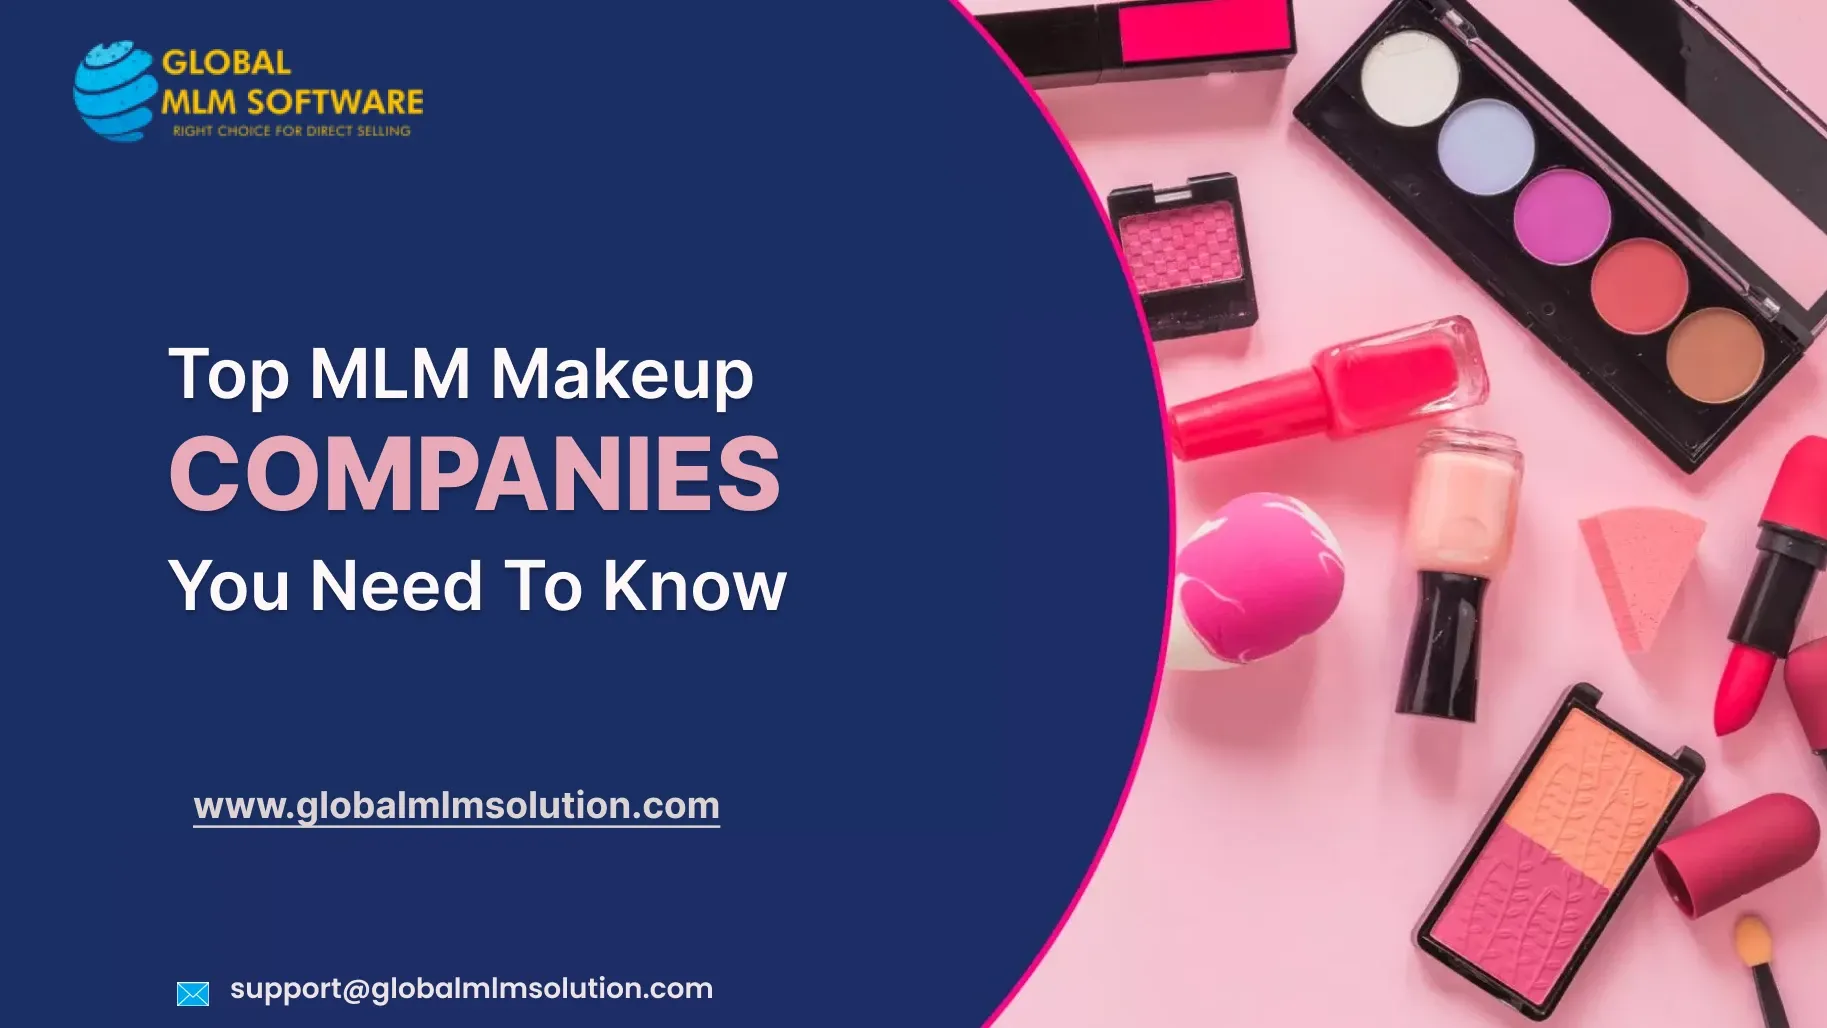 Top 10 MLM Makeup Companies you Need to Know